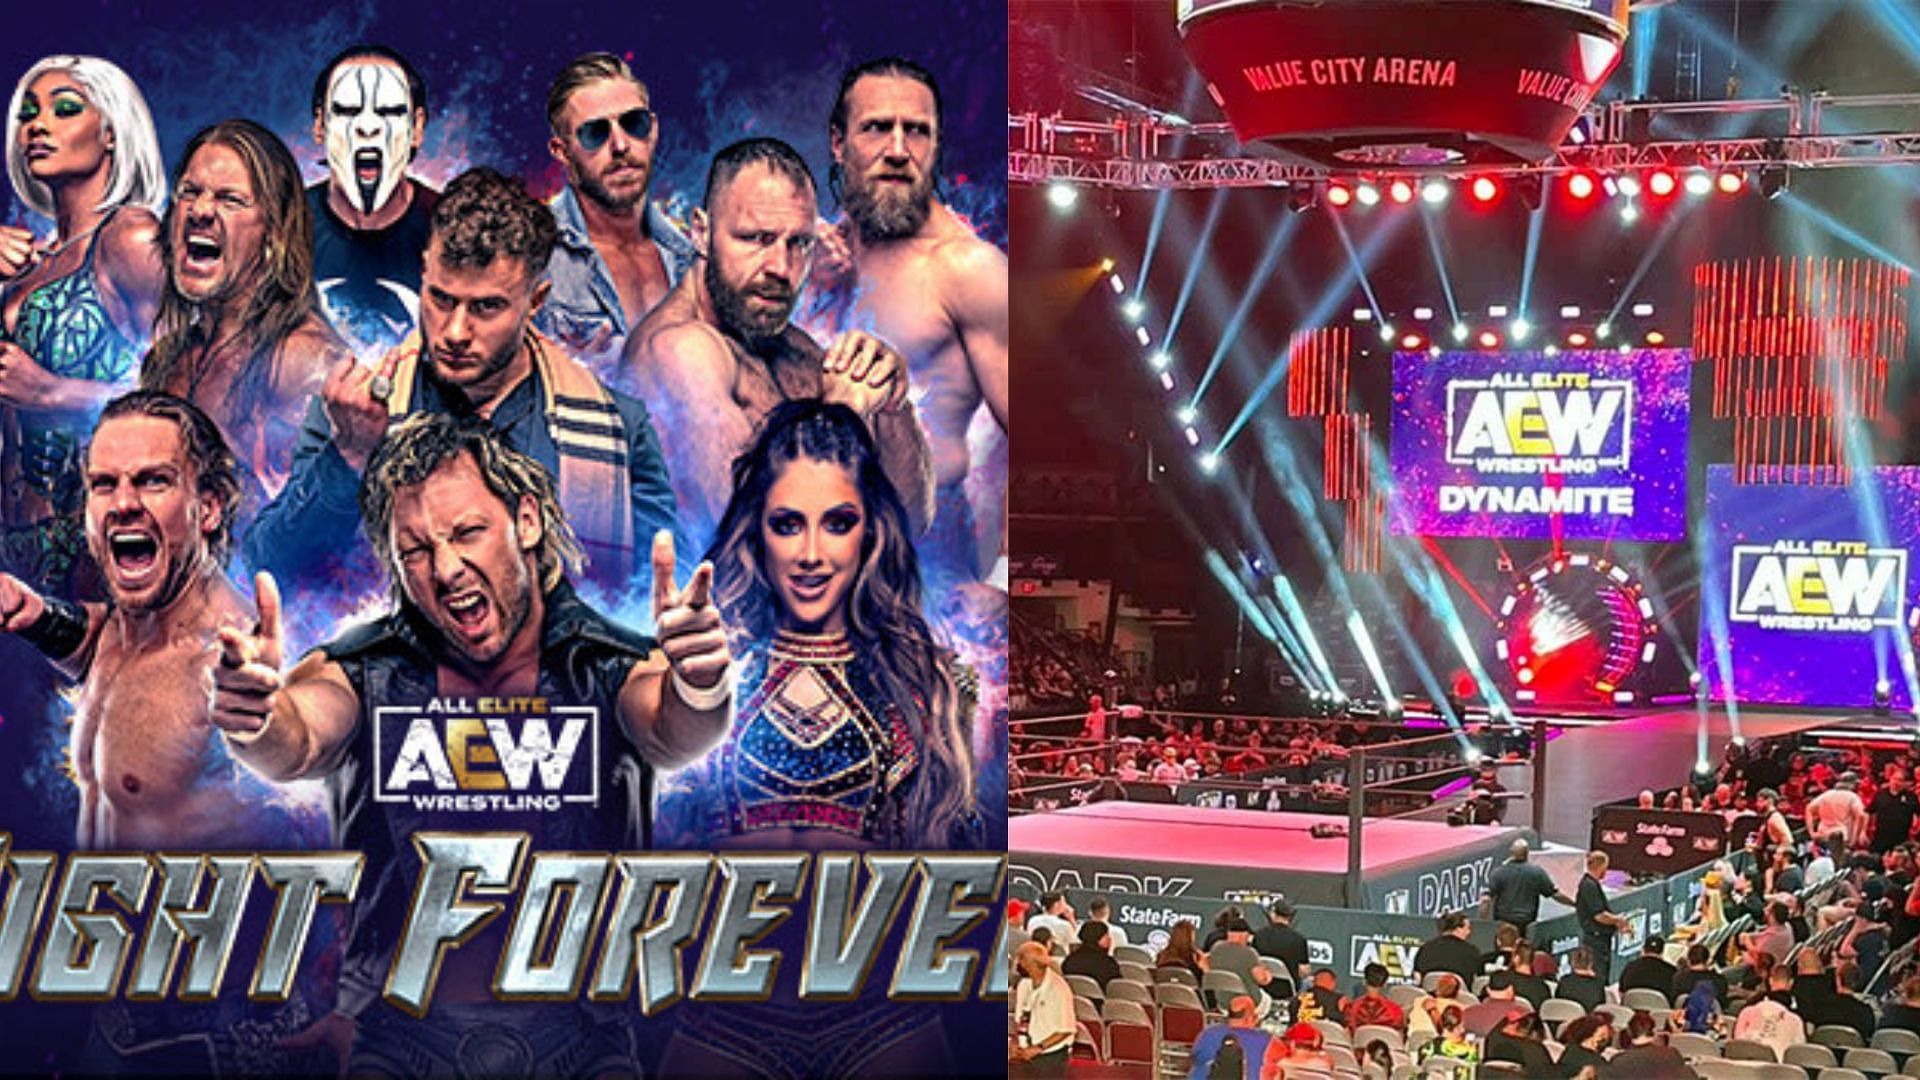 Former WWE star Chris Jericho has his say on AEW Fight Forever